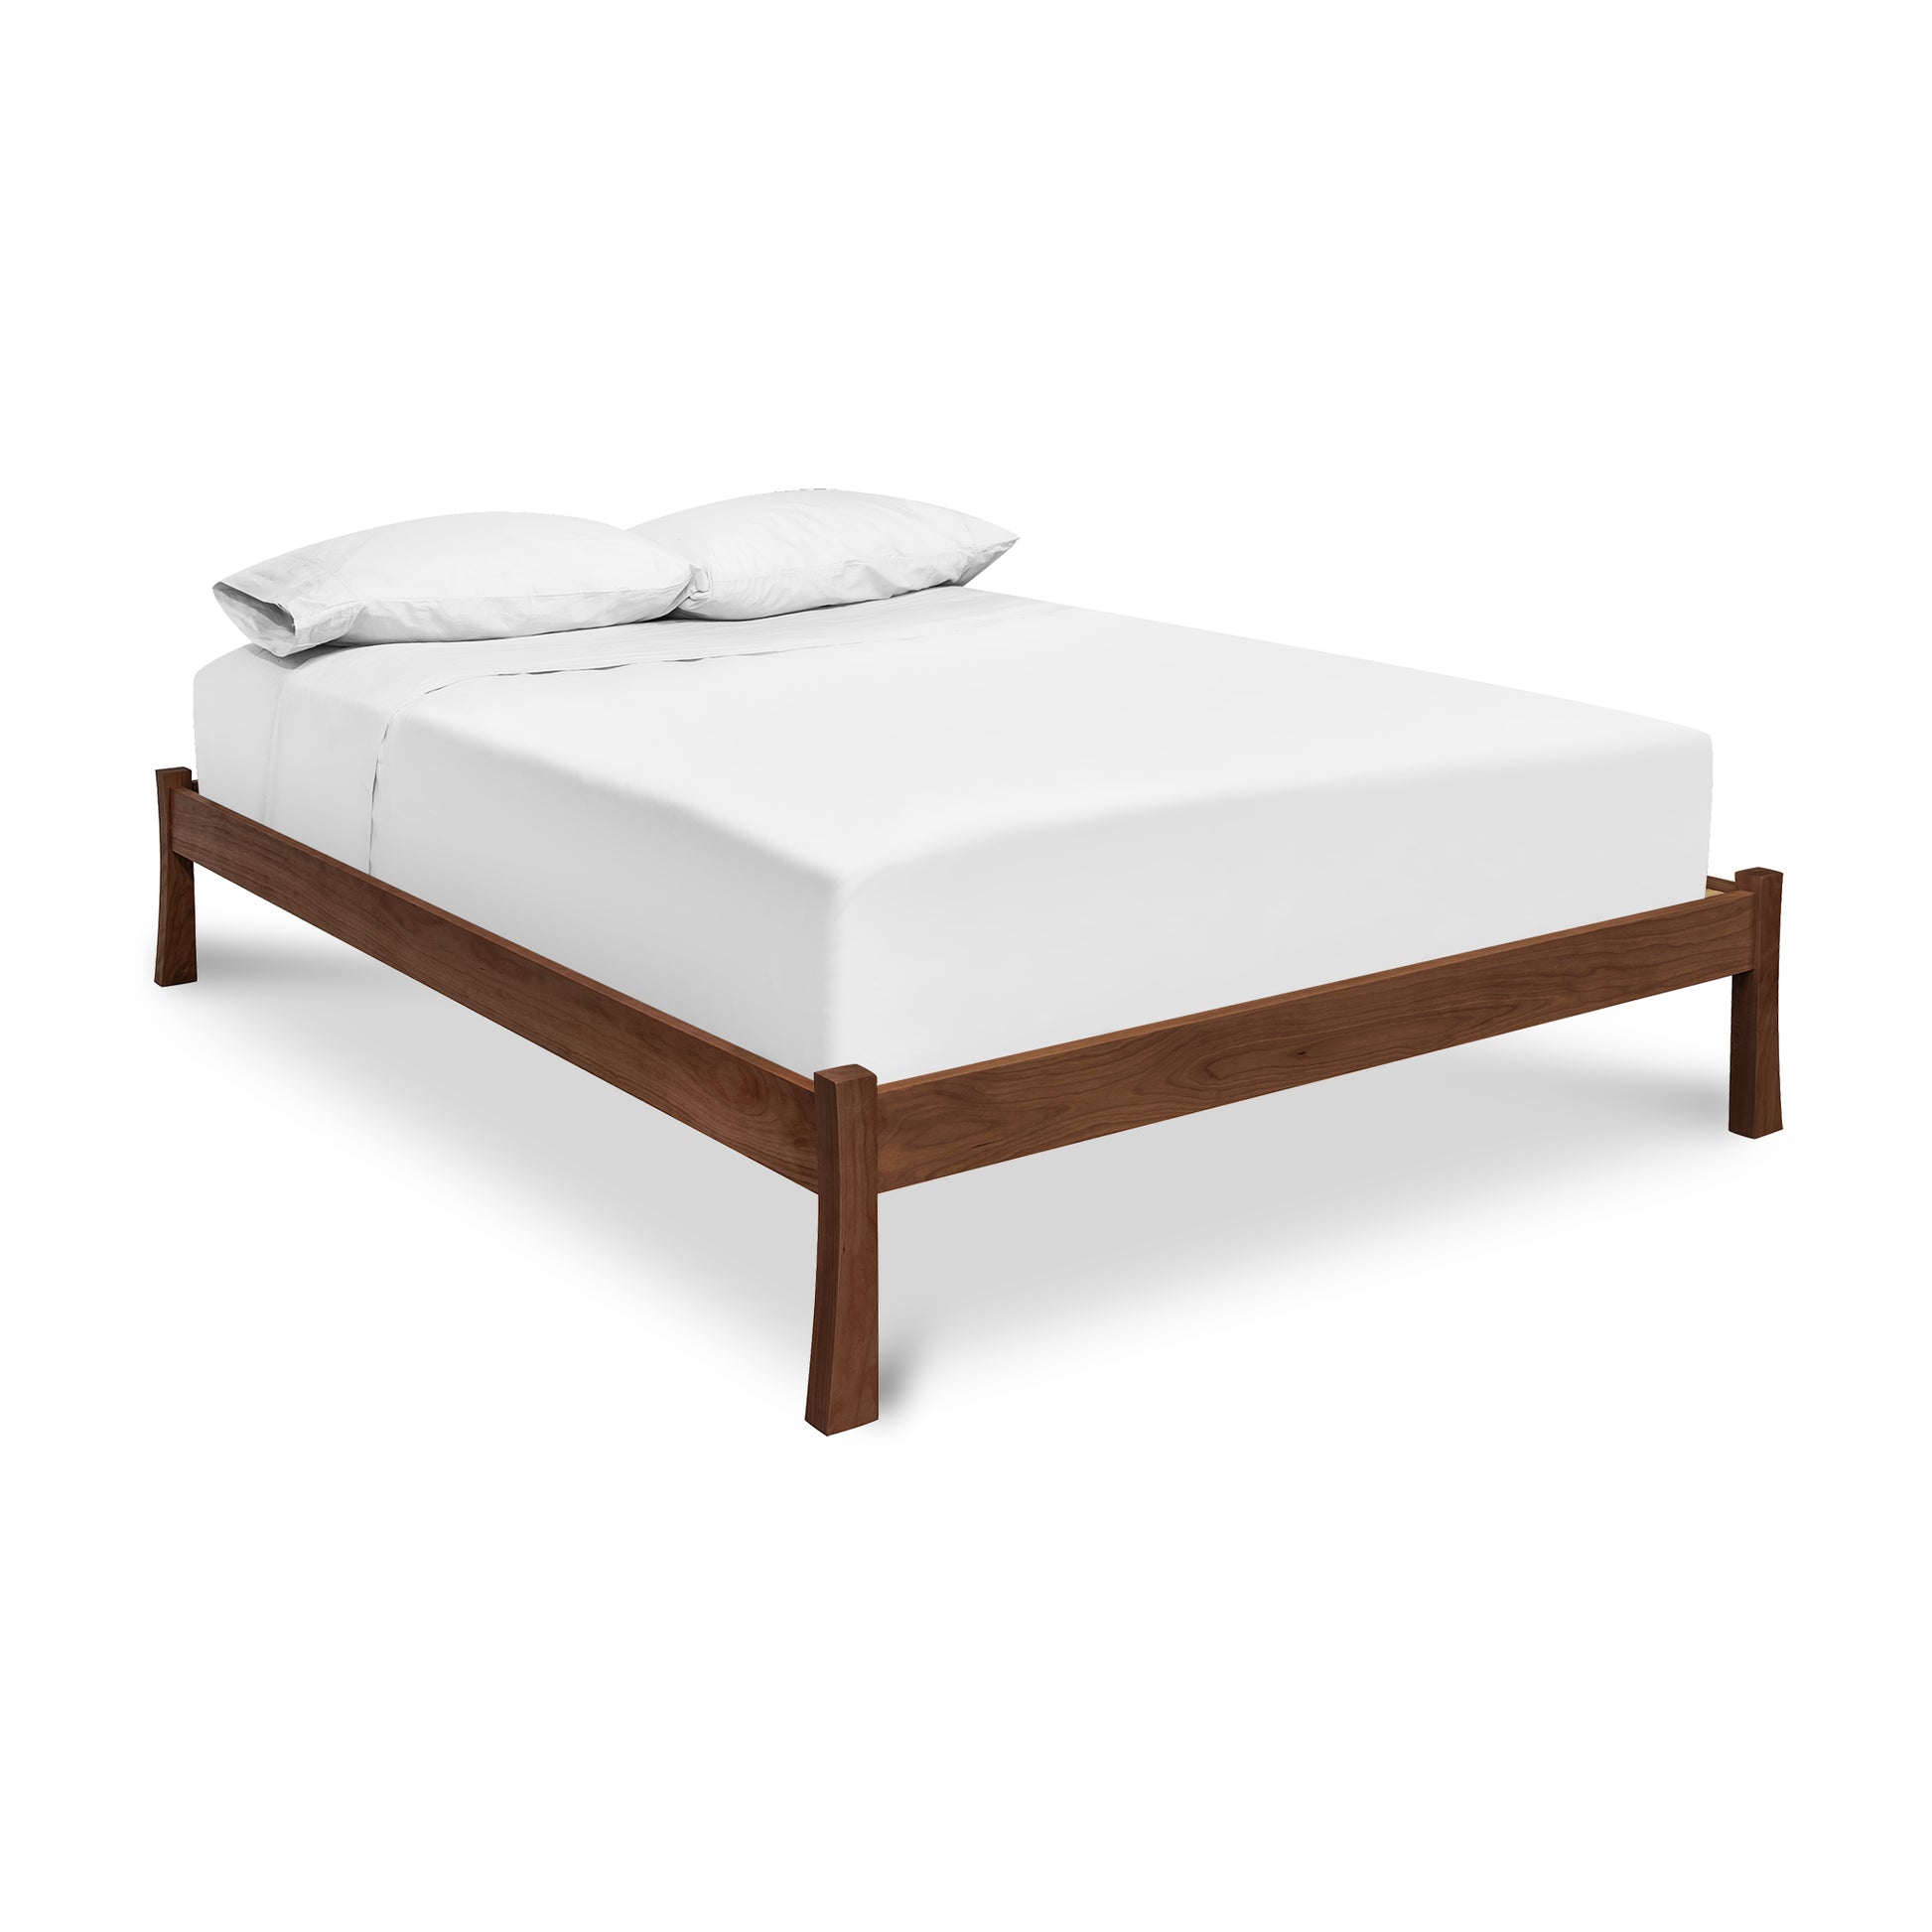 A Contemporary Craftsman Studio-Style Platform Bed with a wooden frame and white sheets, perfect for creating a contemporary bedroom, by Vermont Furniture Designs.